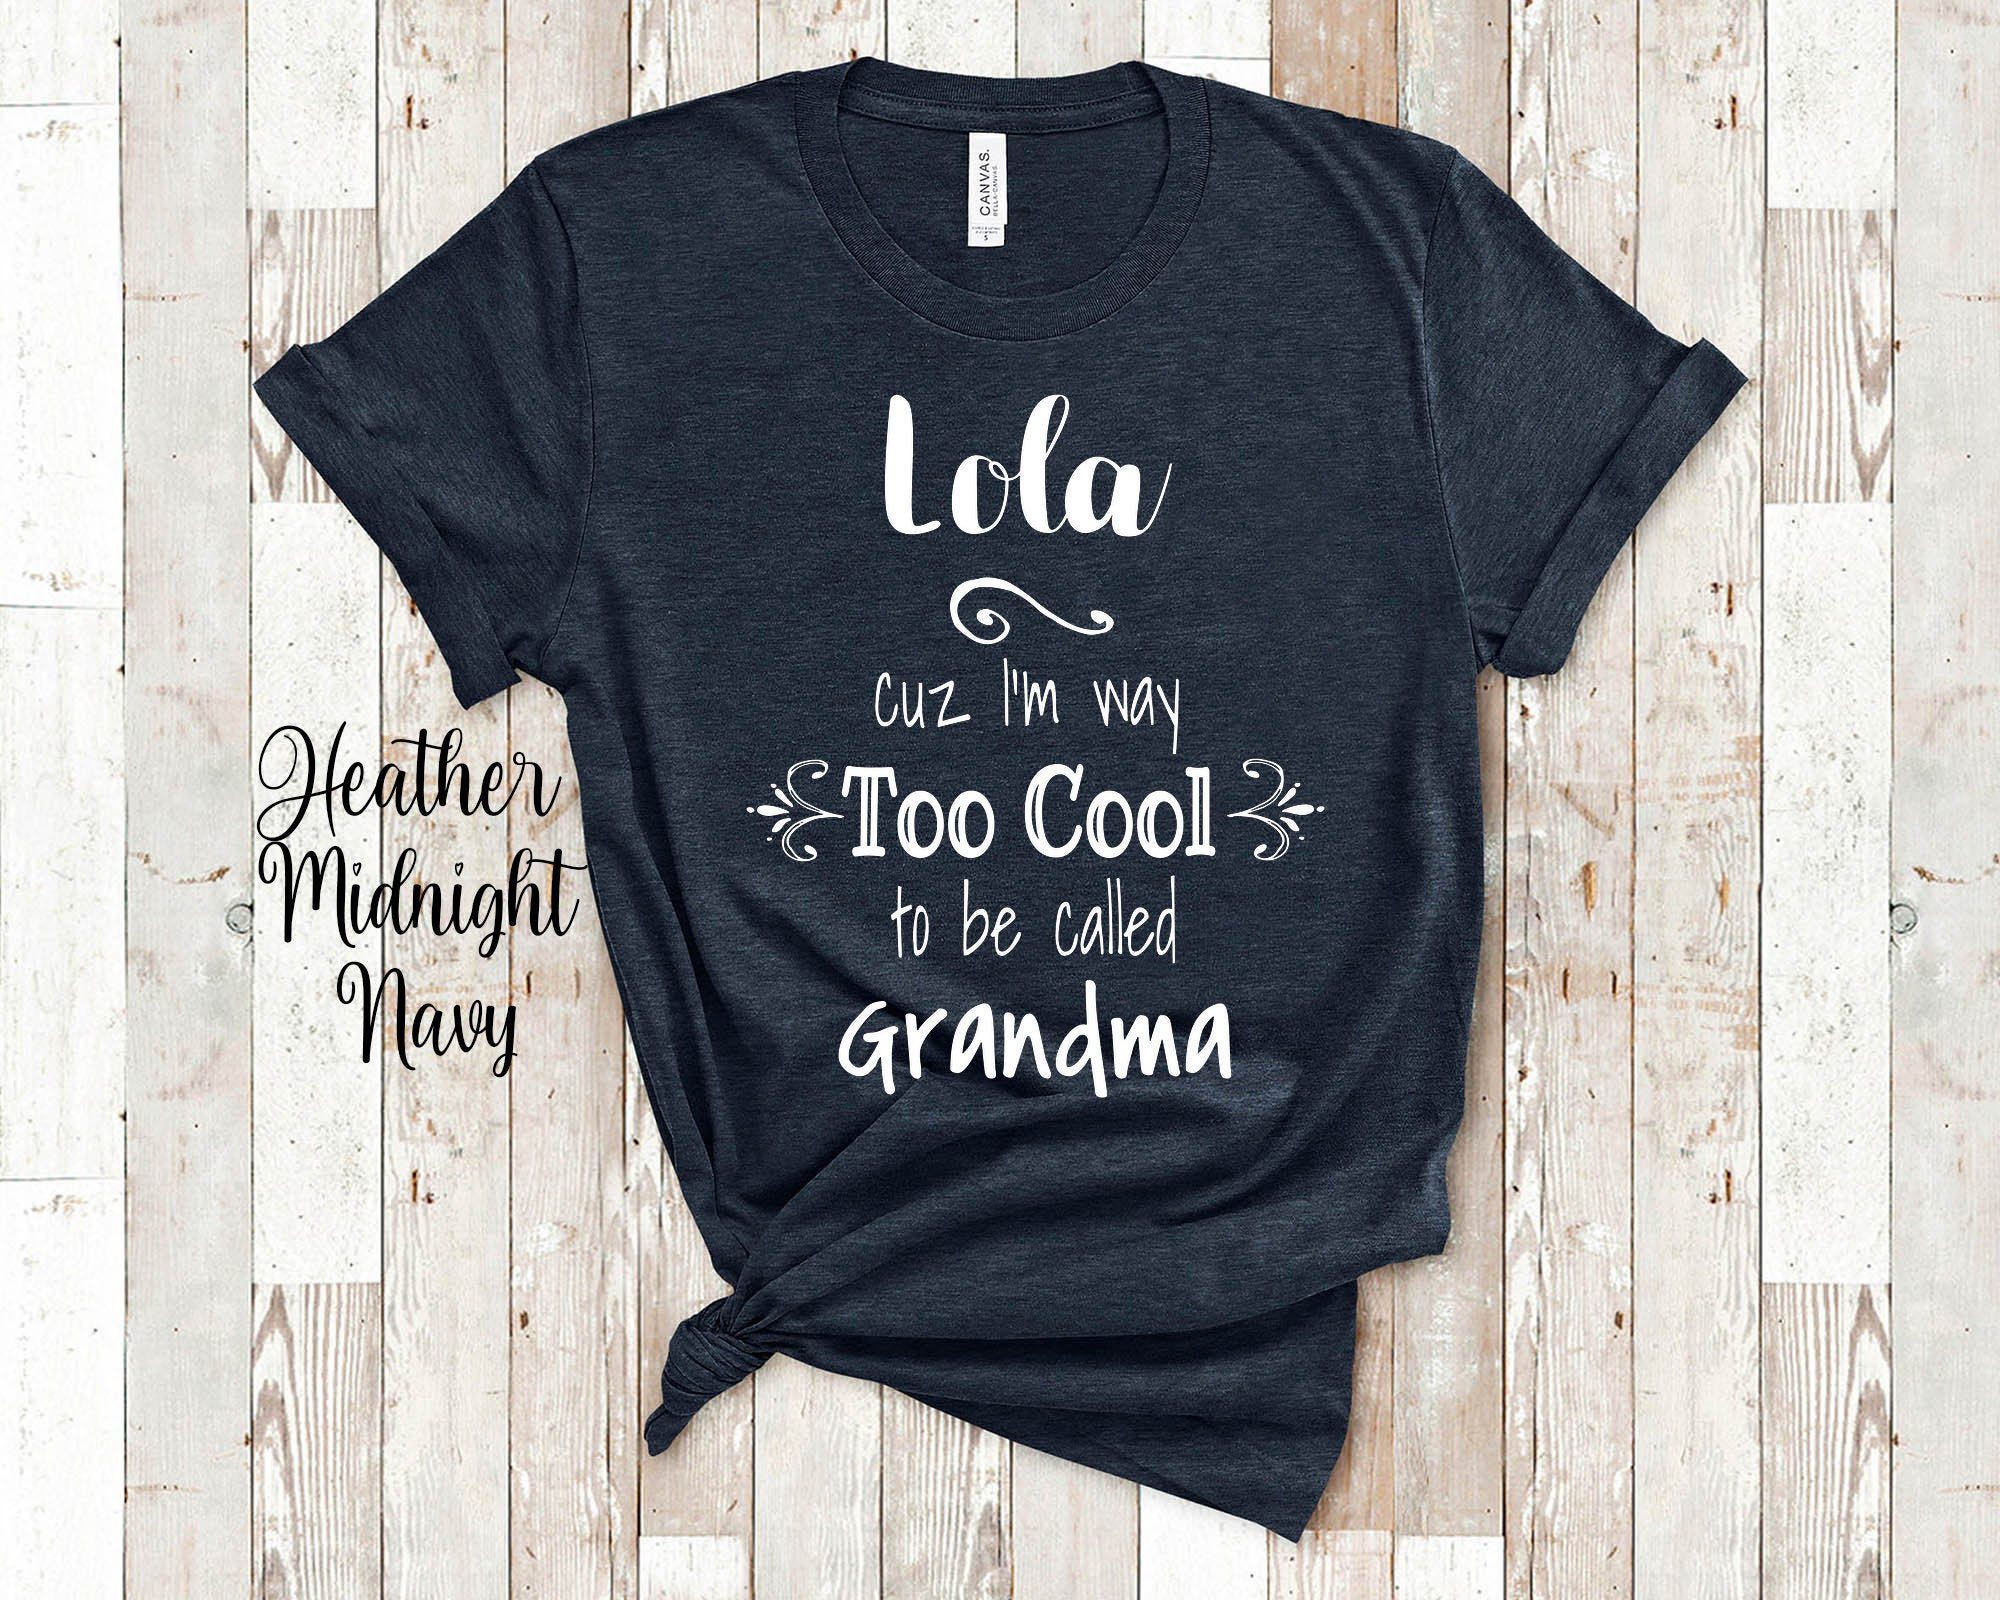 LOL does not mean Lots of love grandma! Kids T-Shirt for Sale by